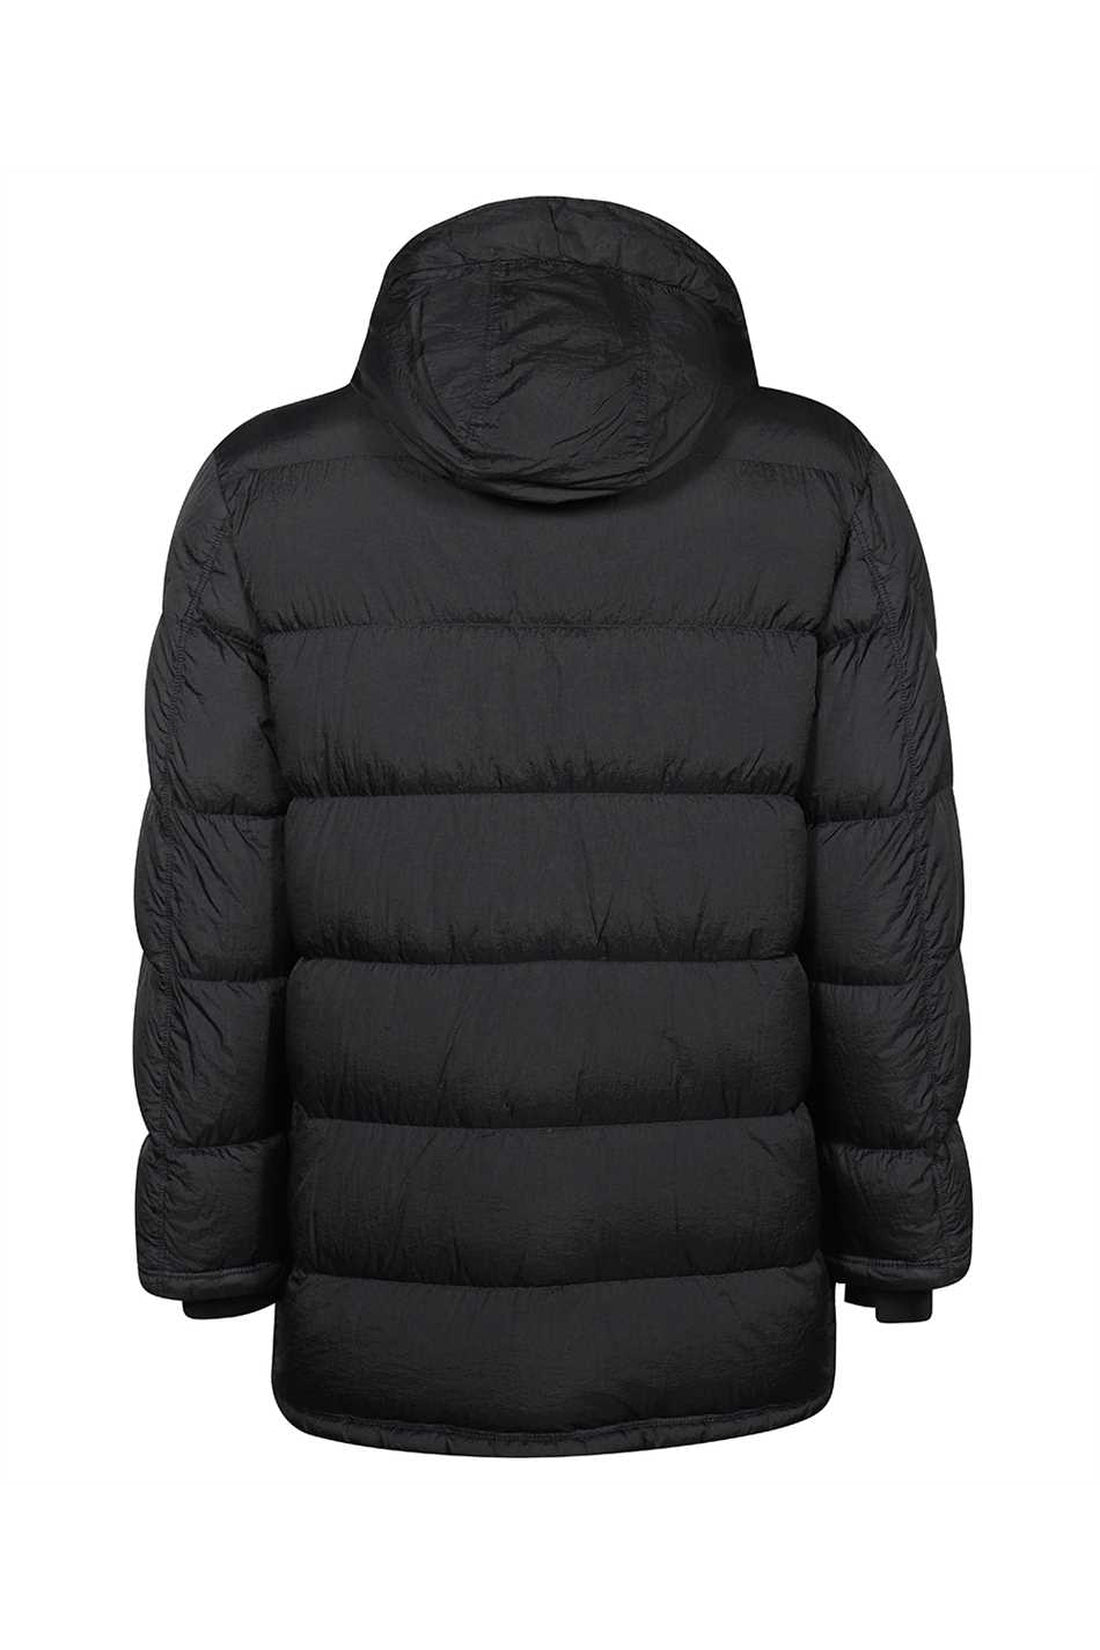 Parajumpers OUTLET | Sheridan hooded down jacket im SALE | ARCHIVIST